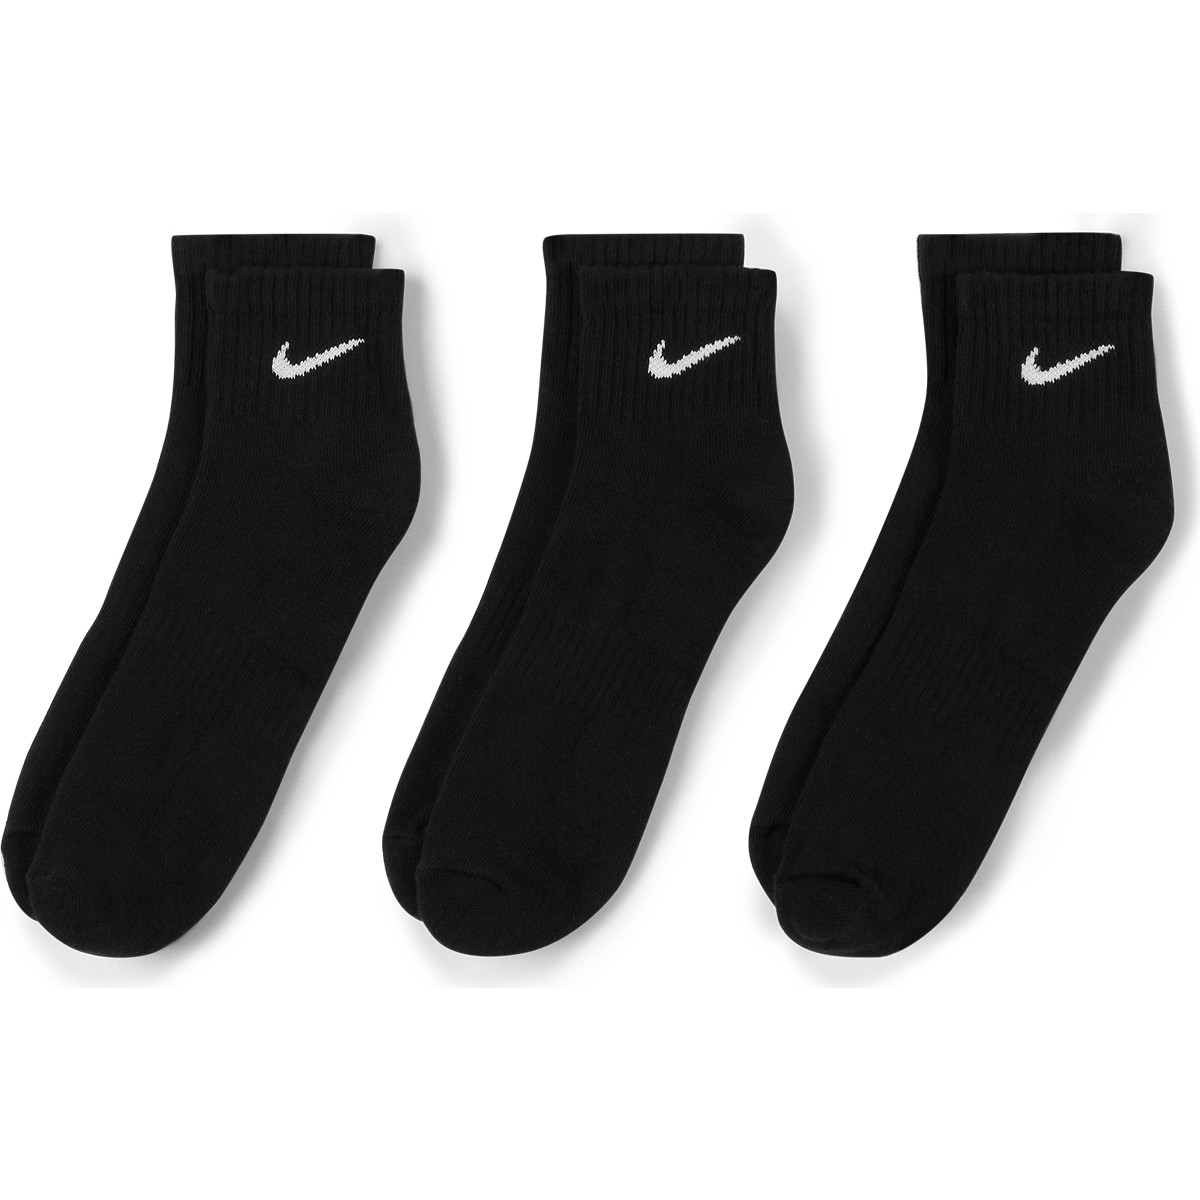 3 PARES DE CALCETINES NIKE CUSHION EVERYDAY BAJOS - NIKE - Mujer - Ropa